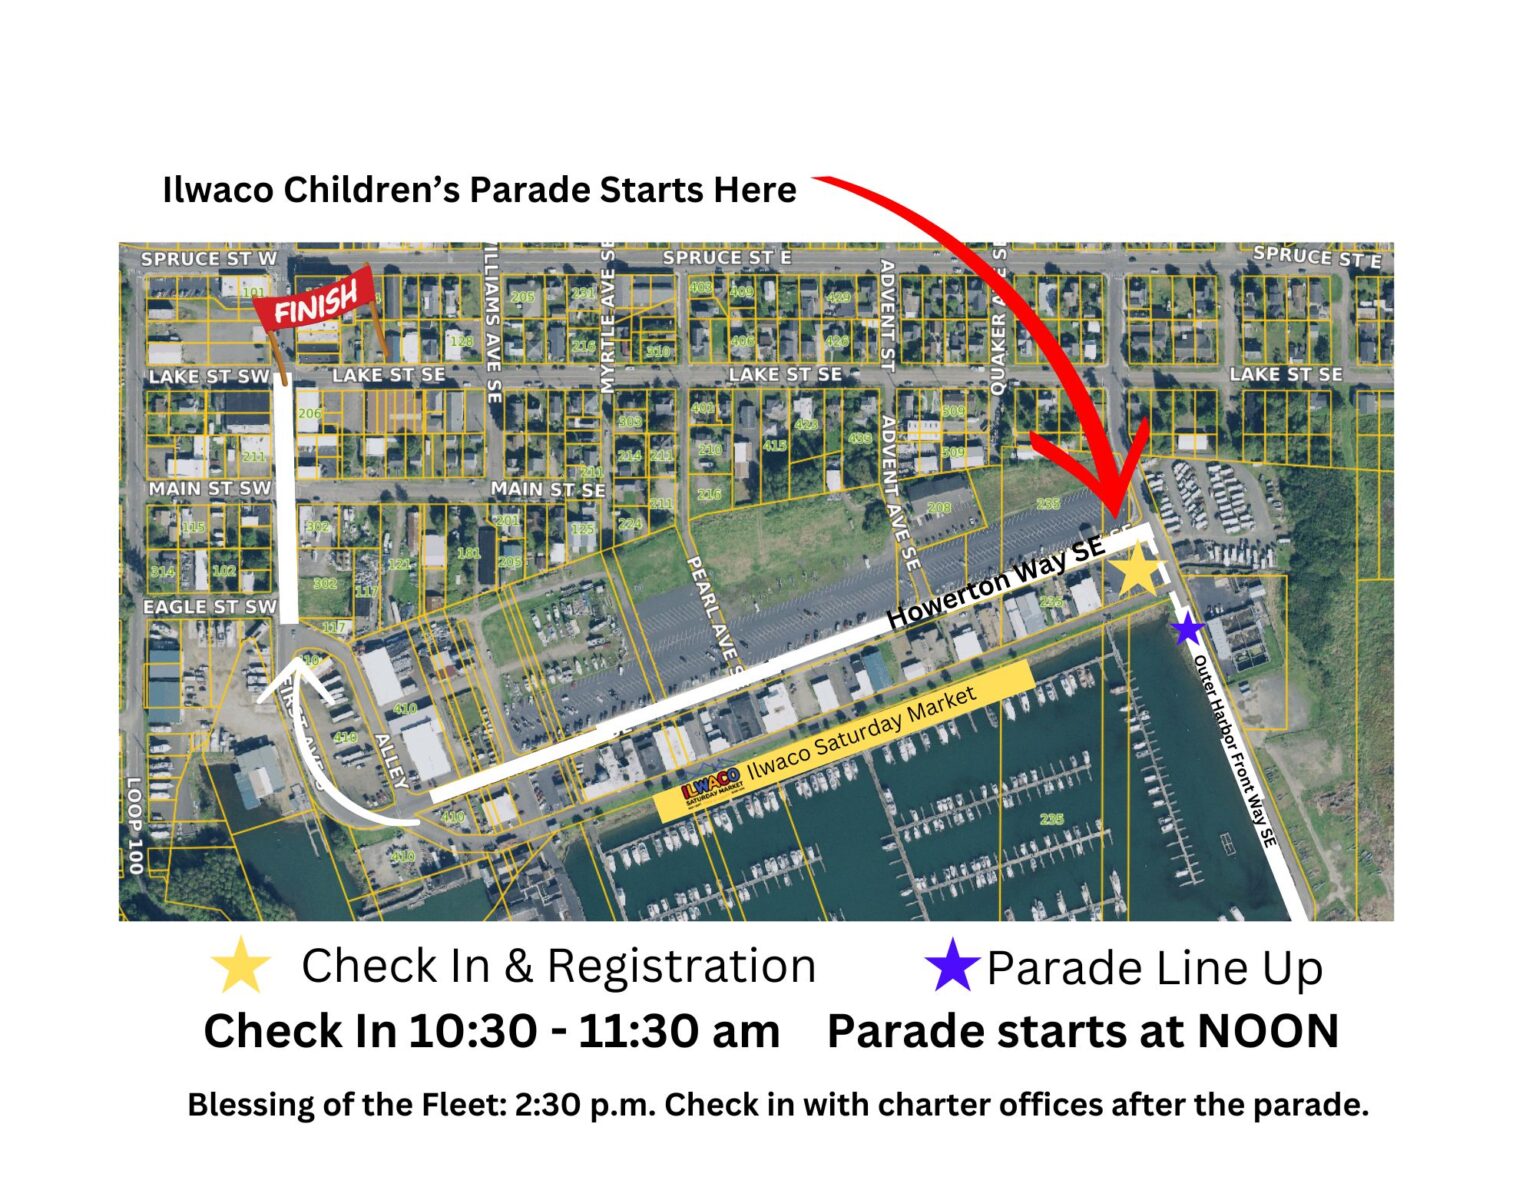 Join the Fun at the Ilwaco Children’s Parade!